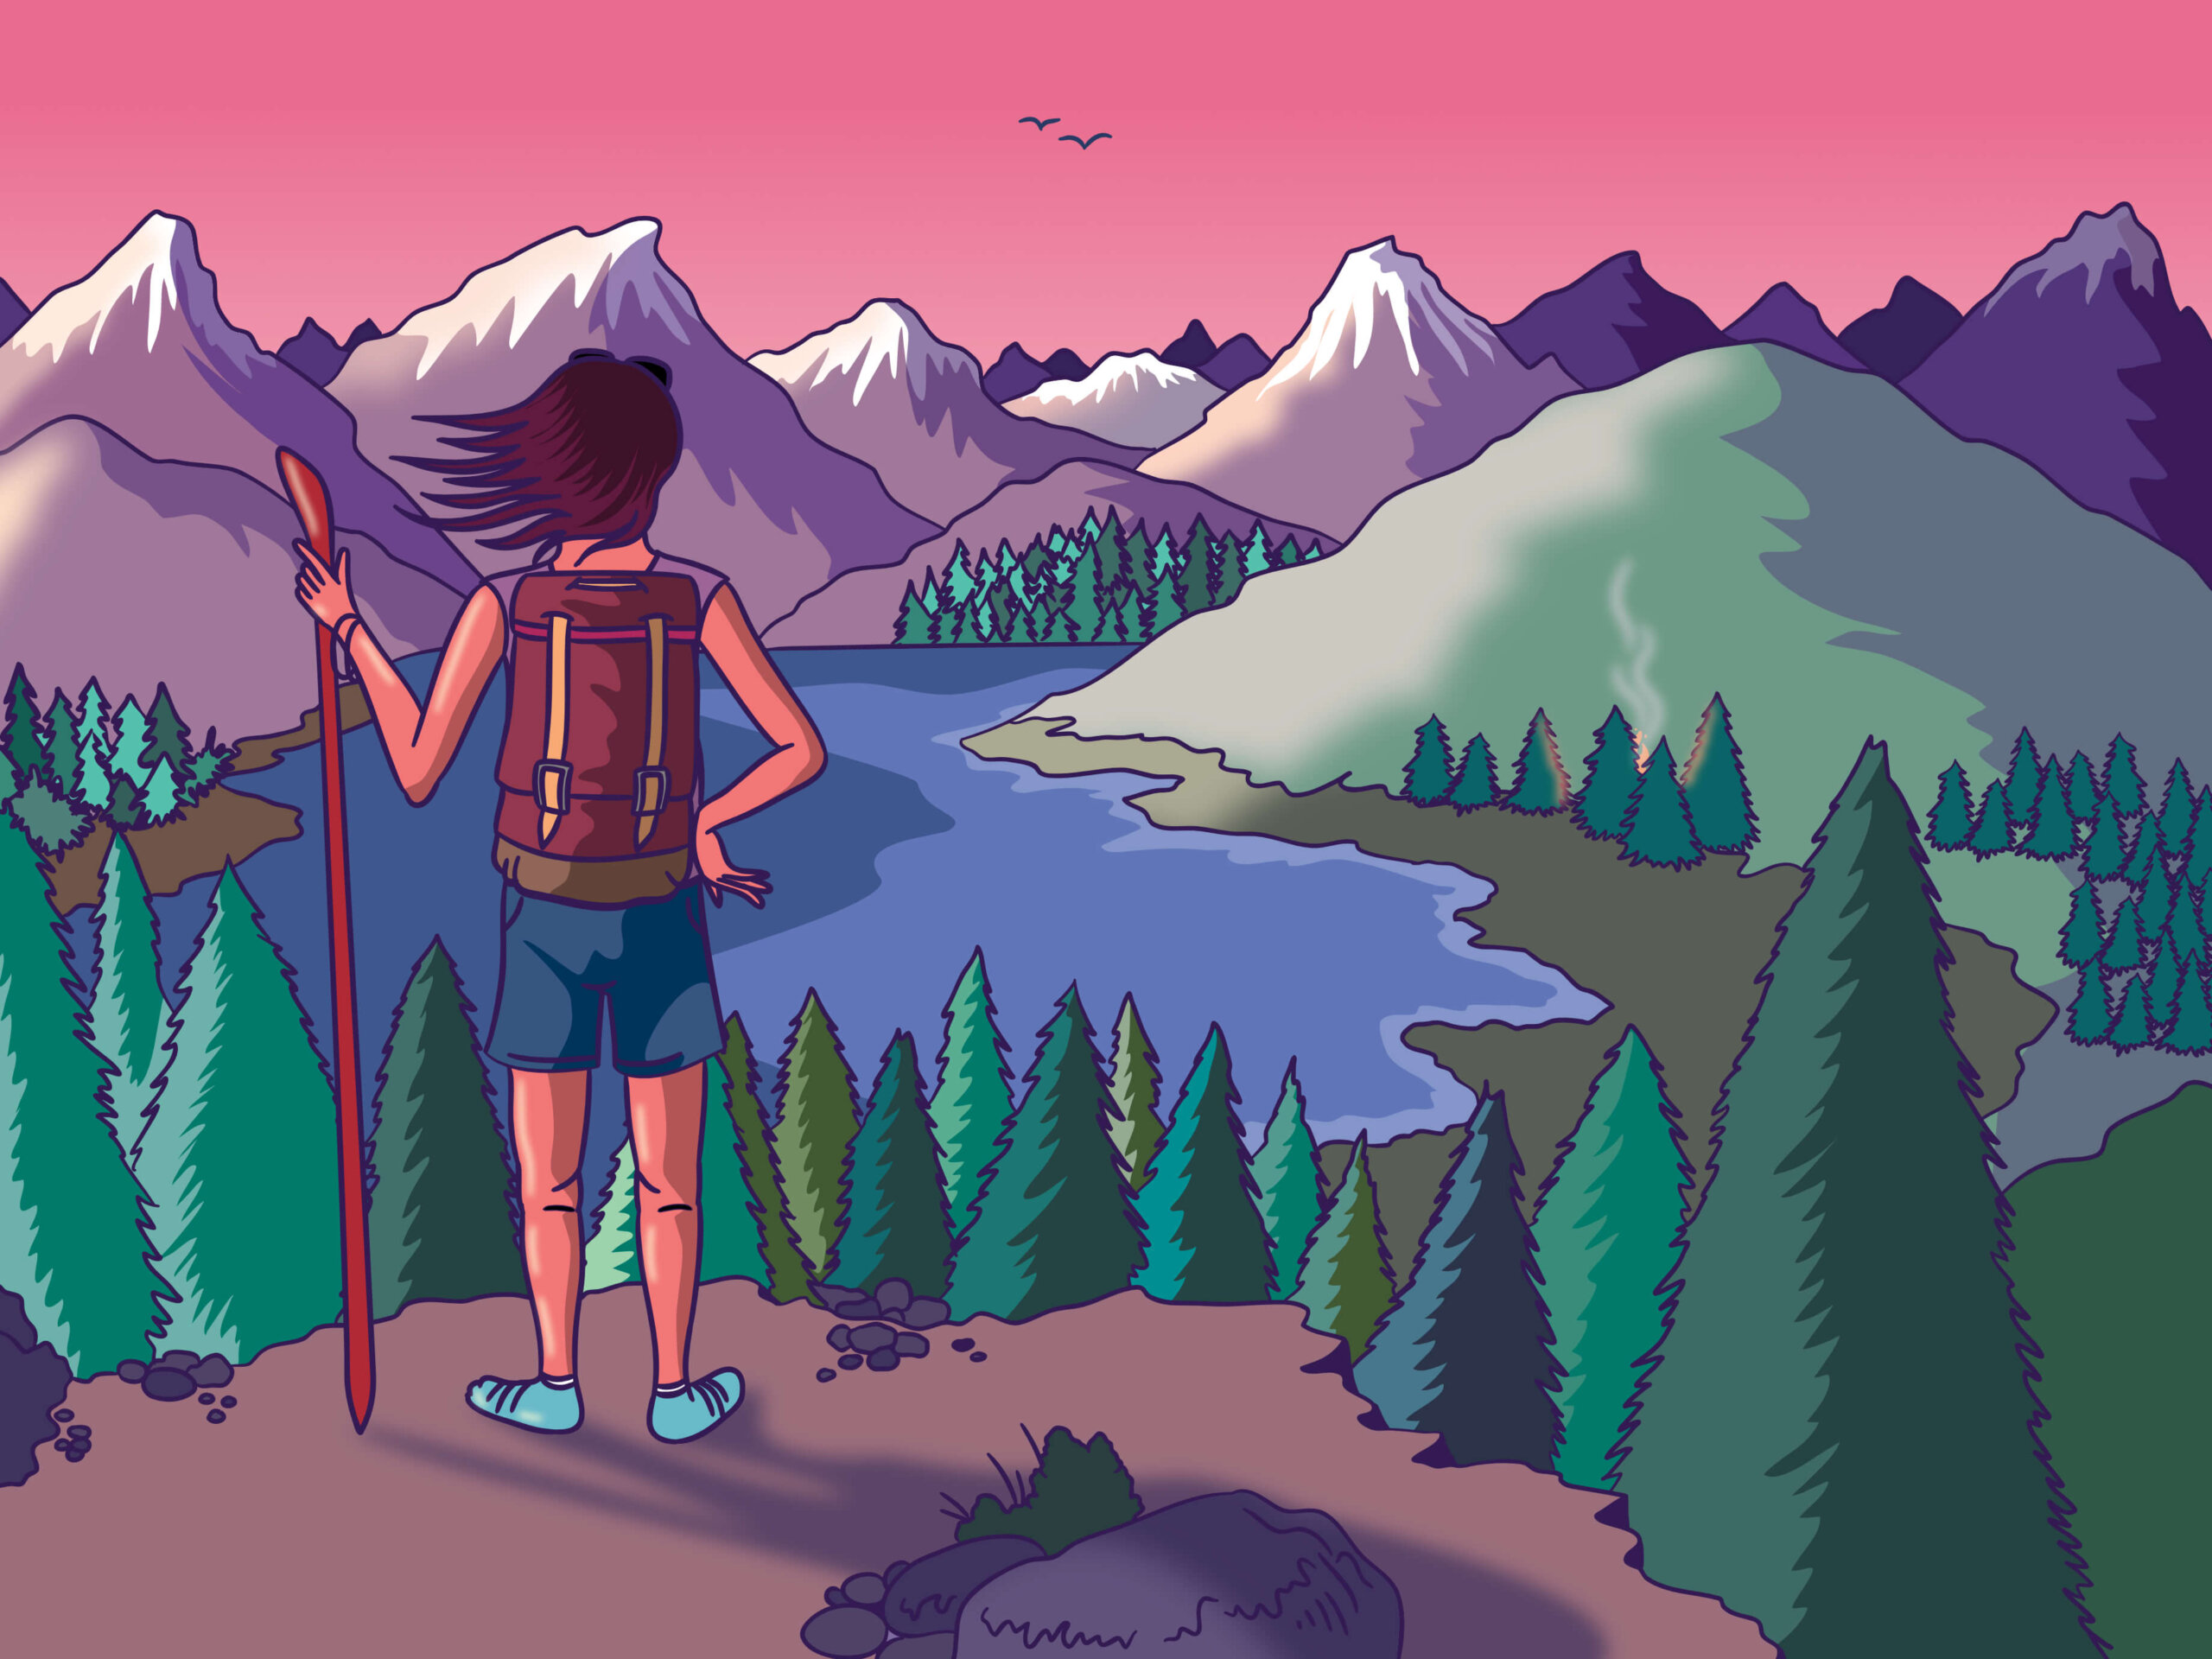 Hiker in the Mountains by Ollie Brown